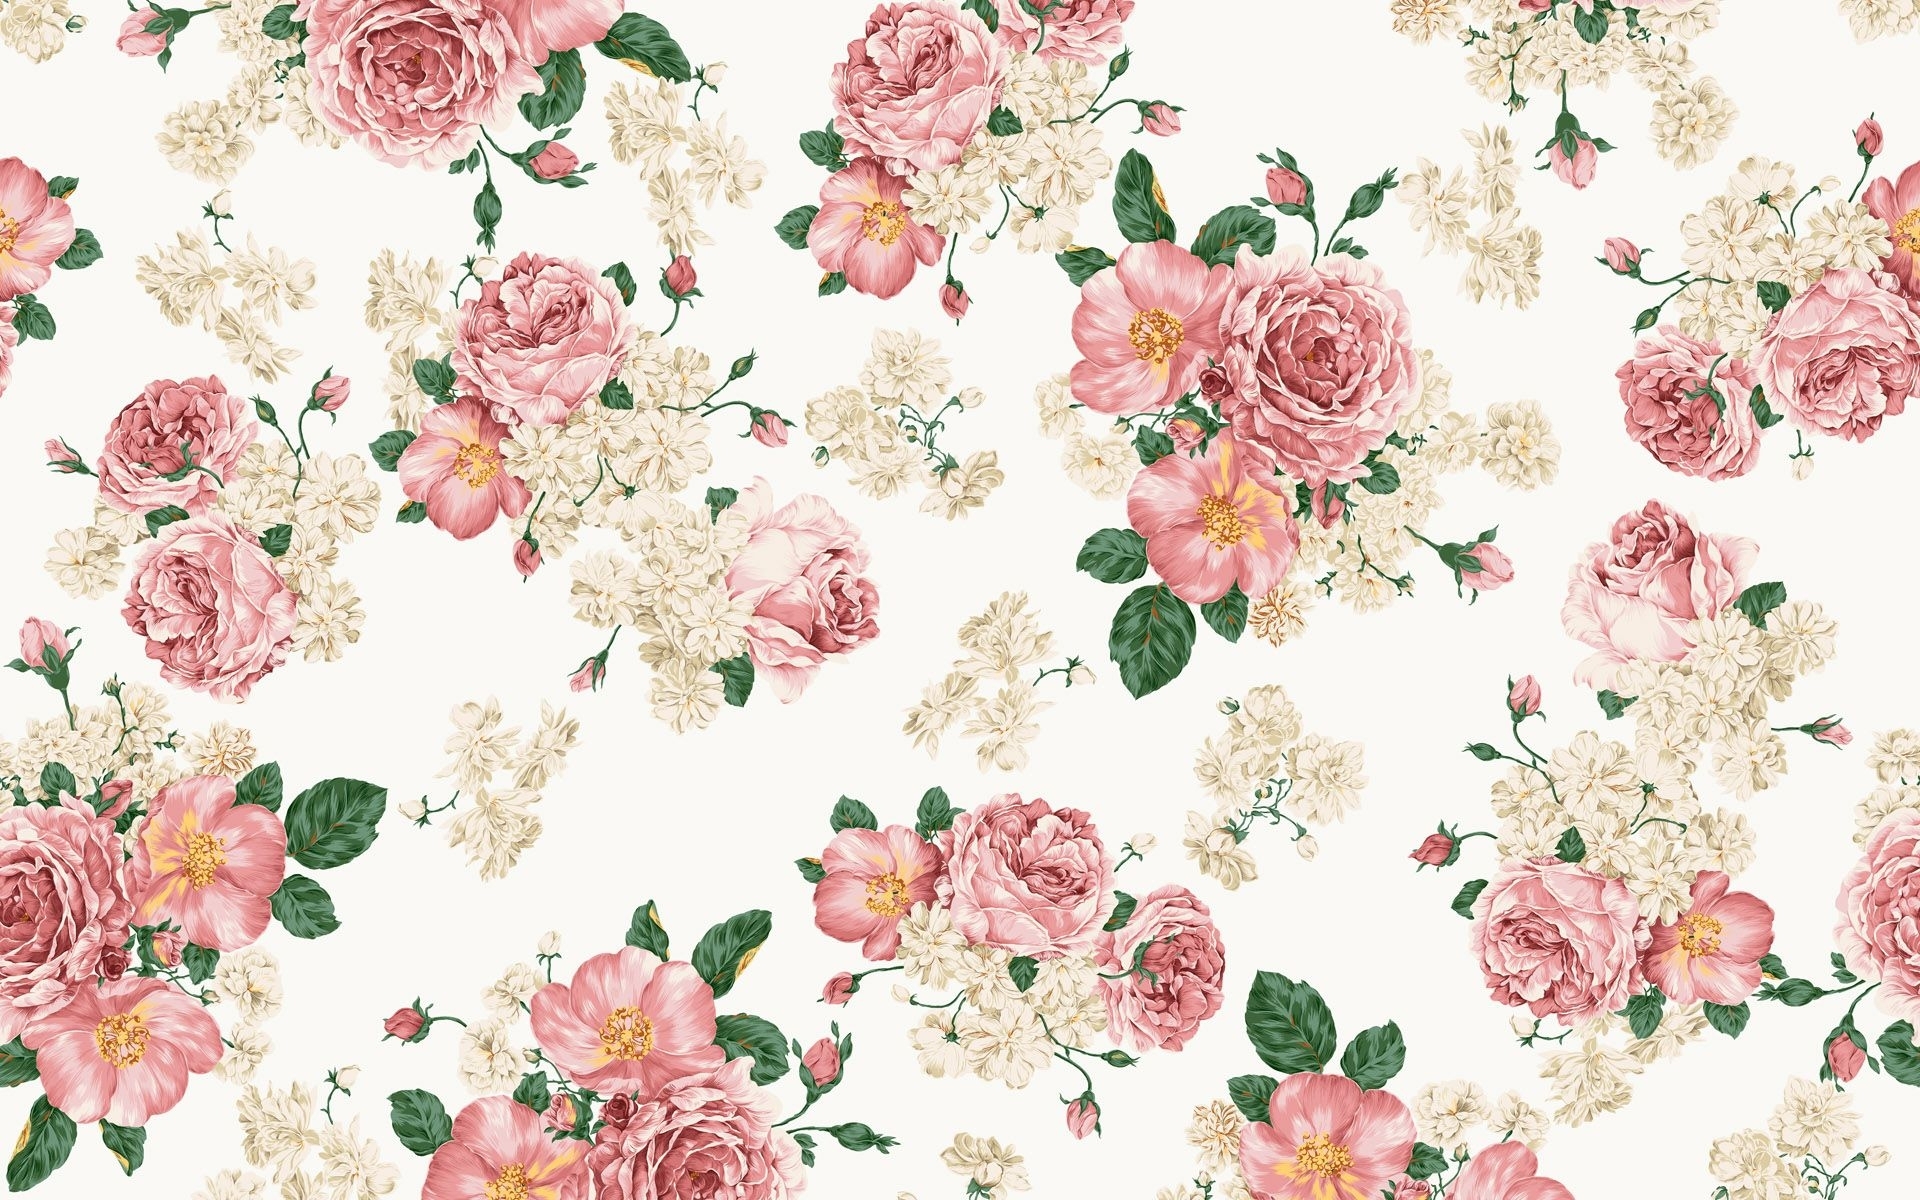 10 Latest Vintage Floral Pattern Wallpaper FULL HD 1080p For PC Background